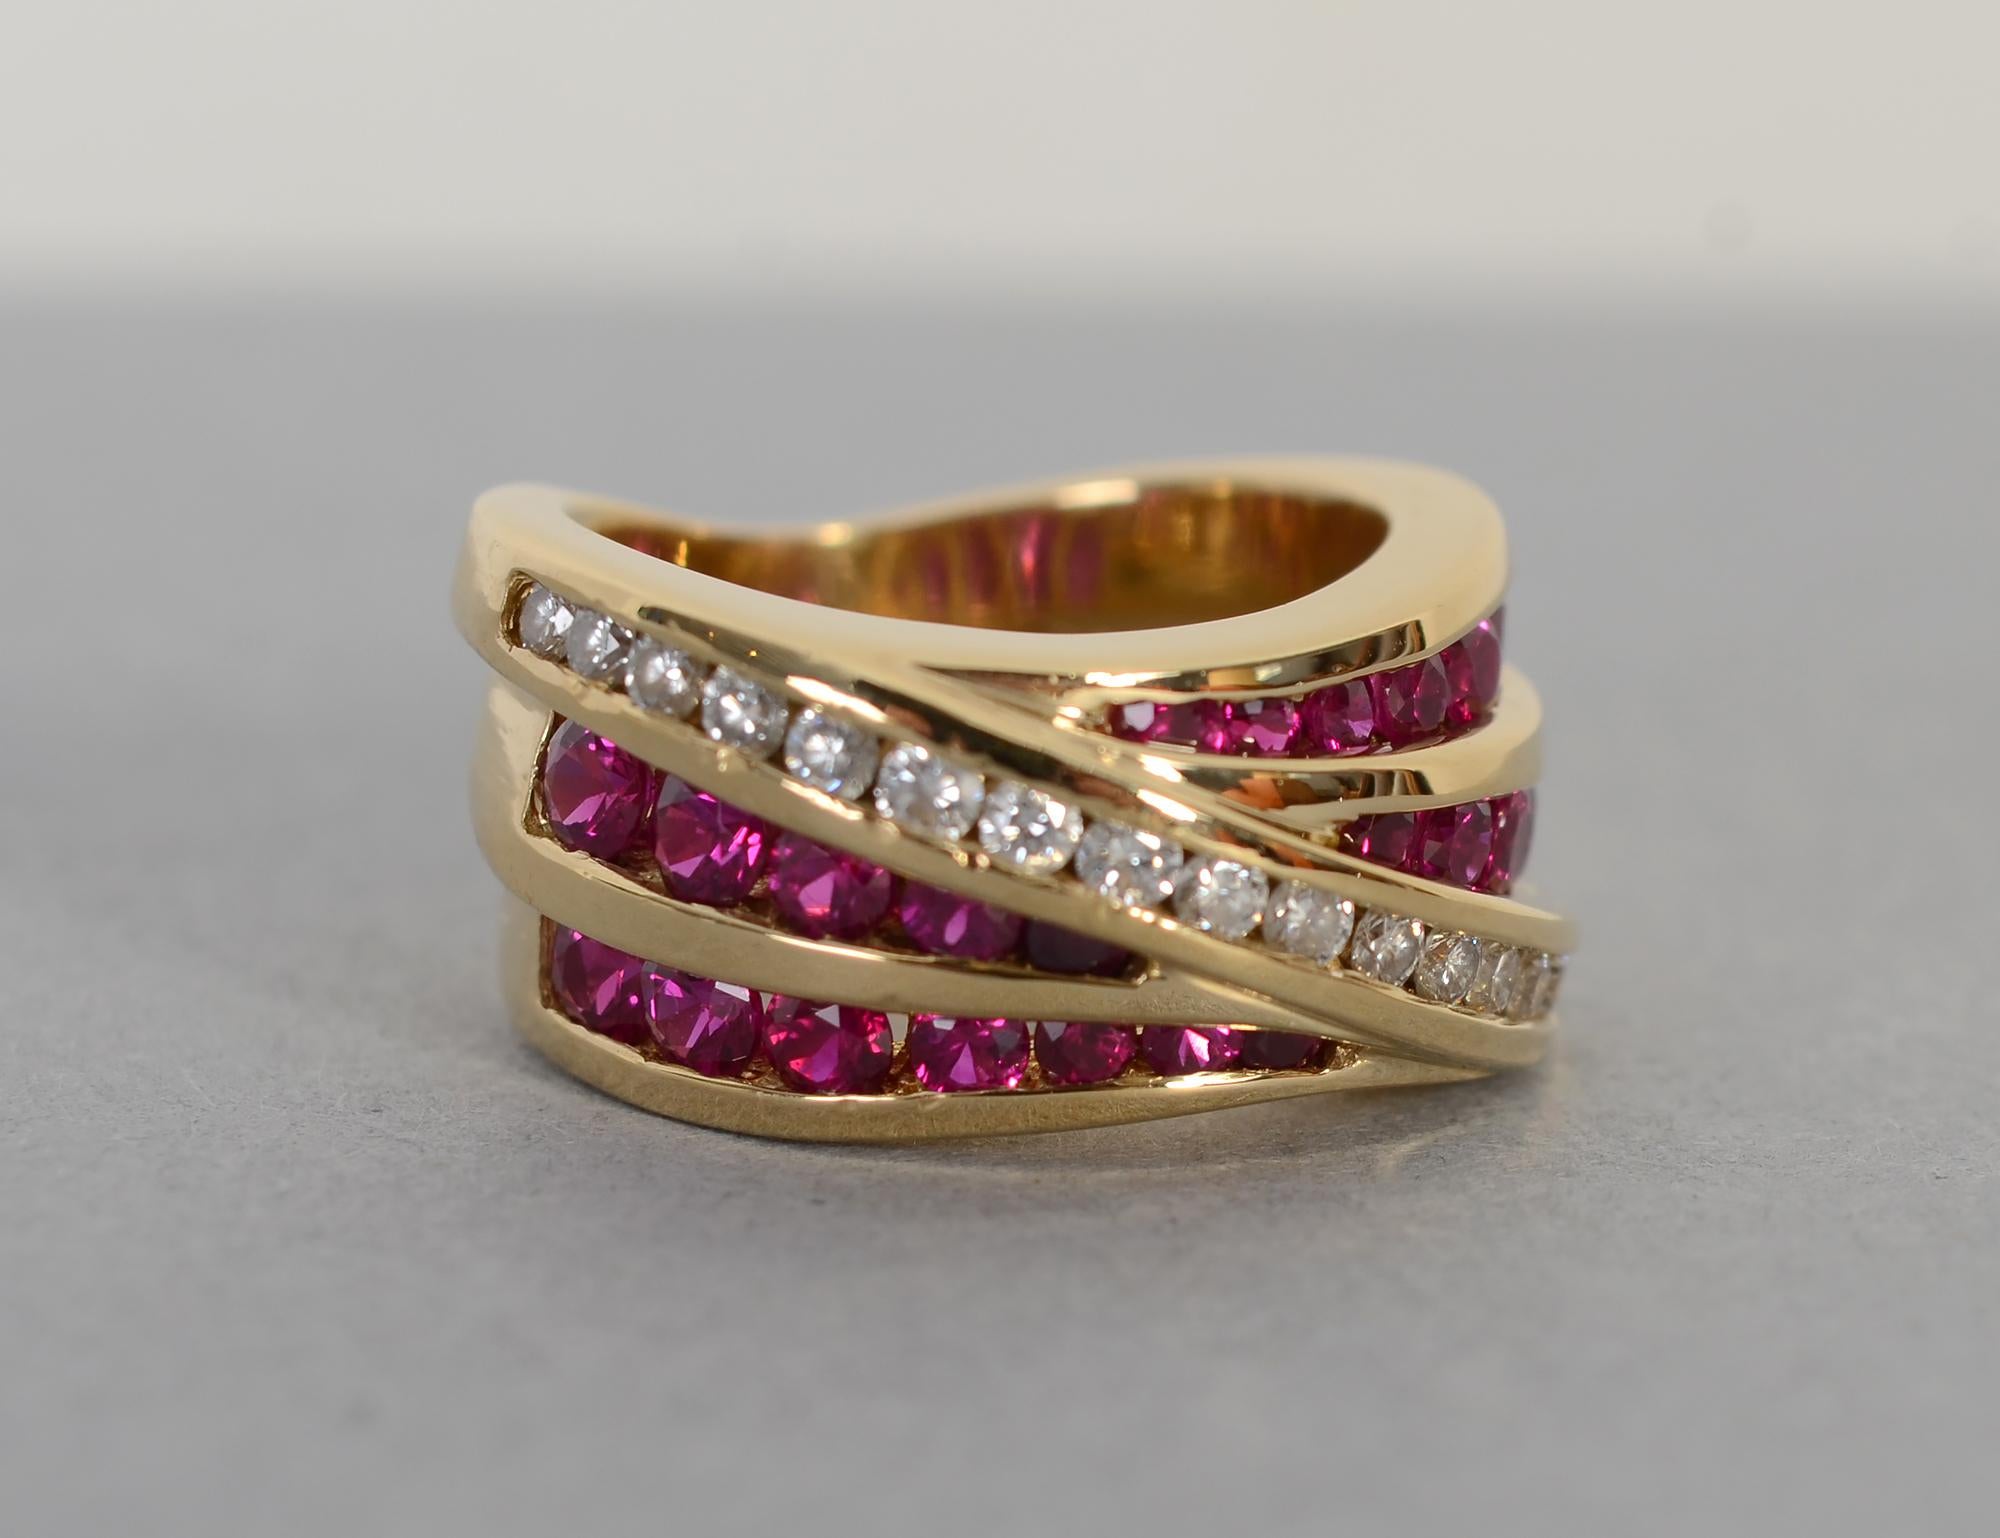 Beautiful ring by Charles Krypell  with two rows of rubies over which is a diagonal band of 17 diamonds. The ring is intentionally uneven in height as part of the three dimensional almost fabric-like design. It is 7/16